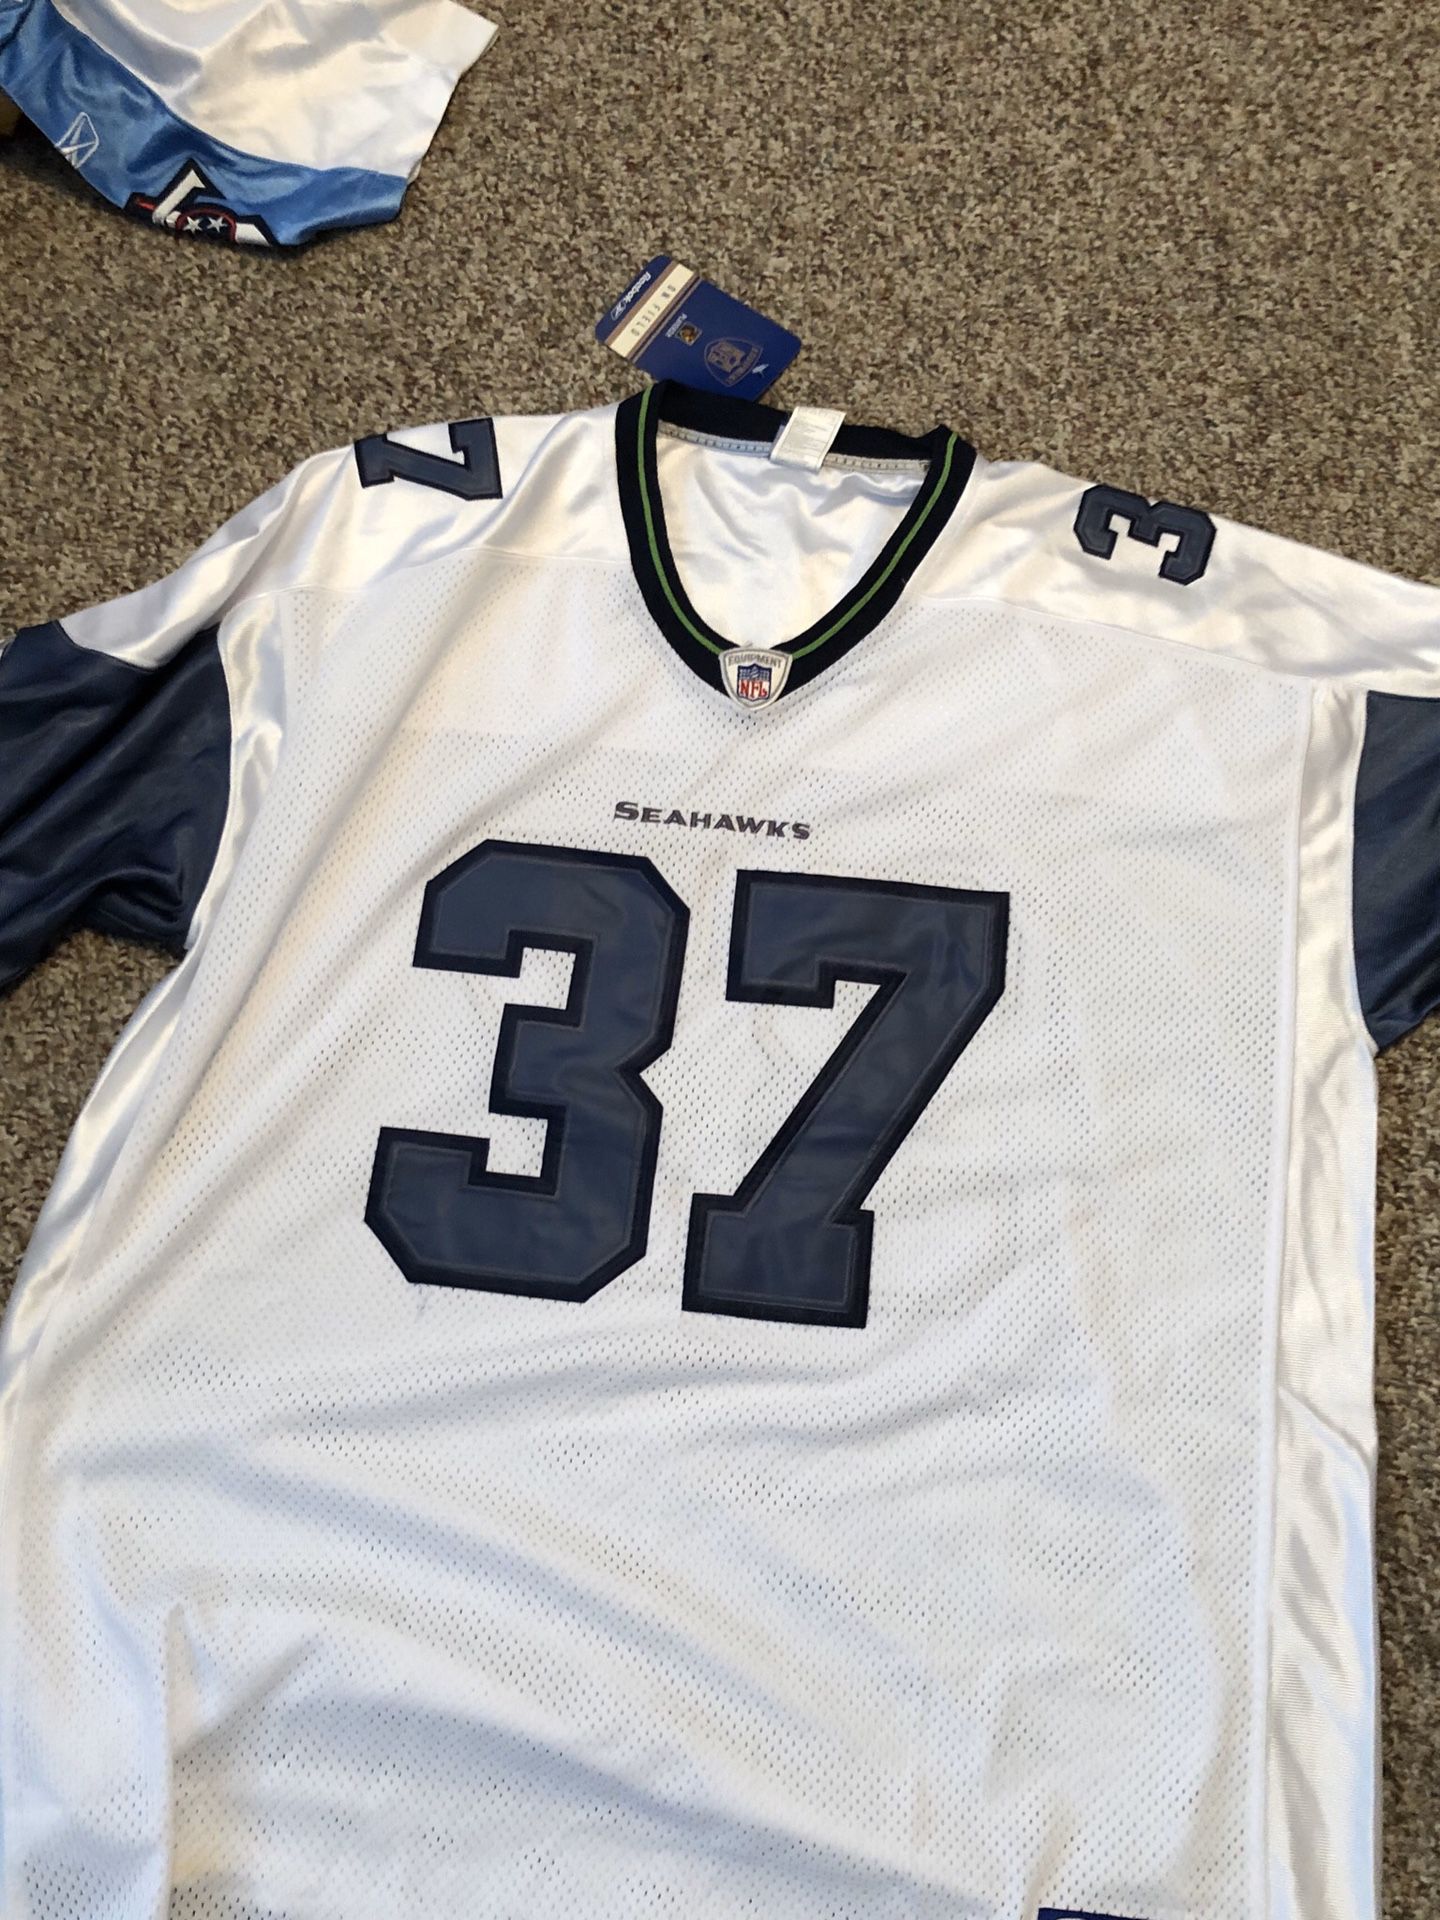 NFL AUTHENTIC SHAWN ALEXANDER JERSEY